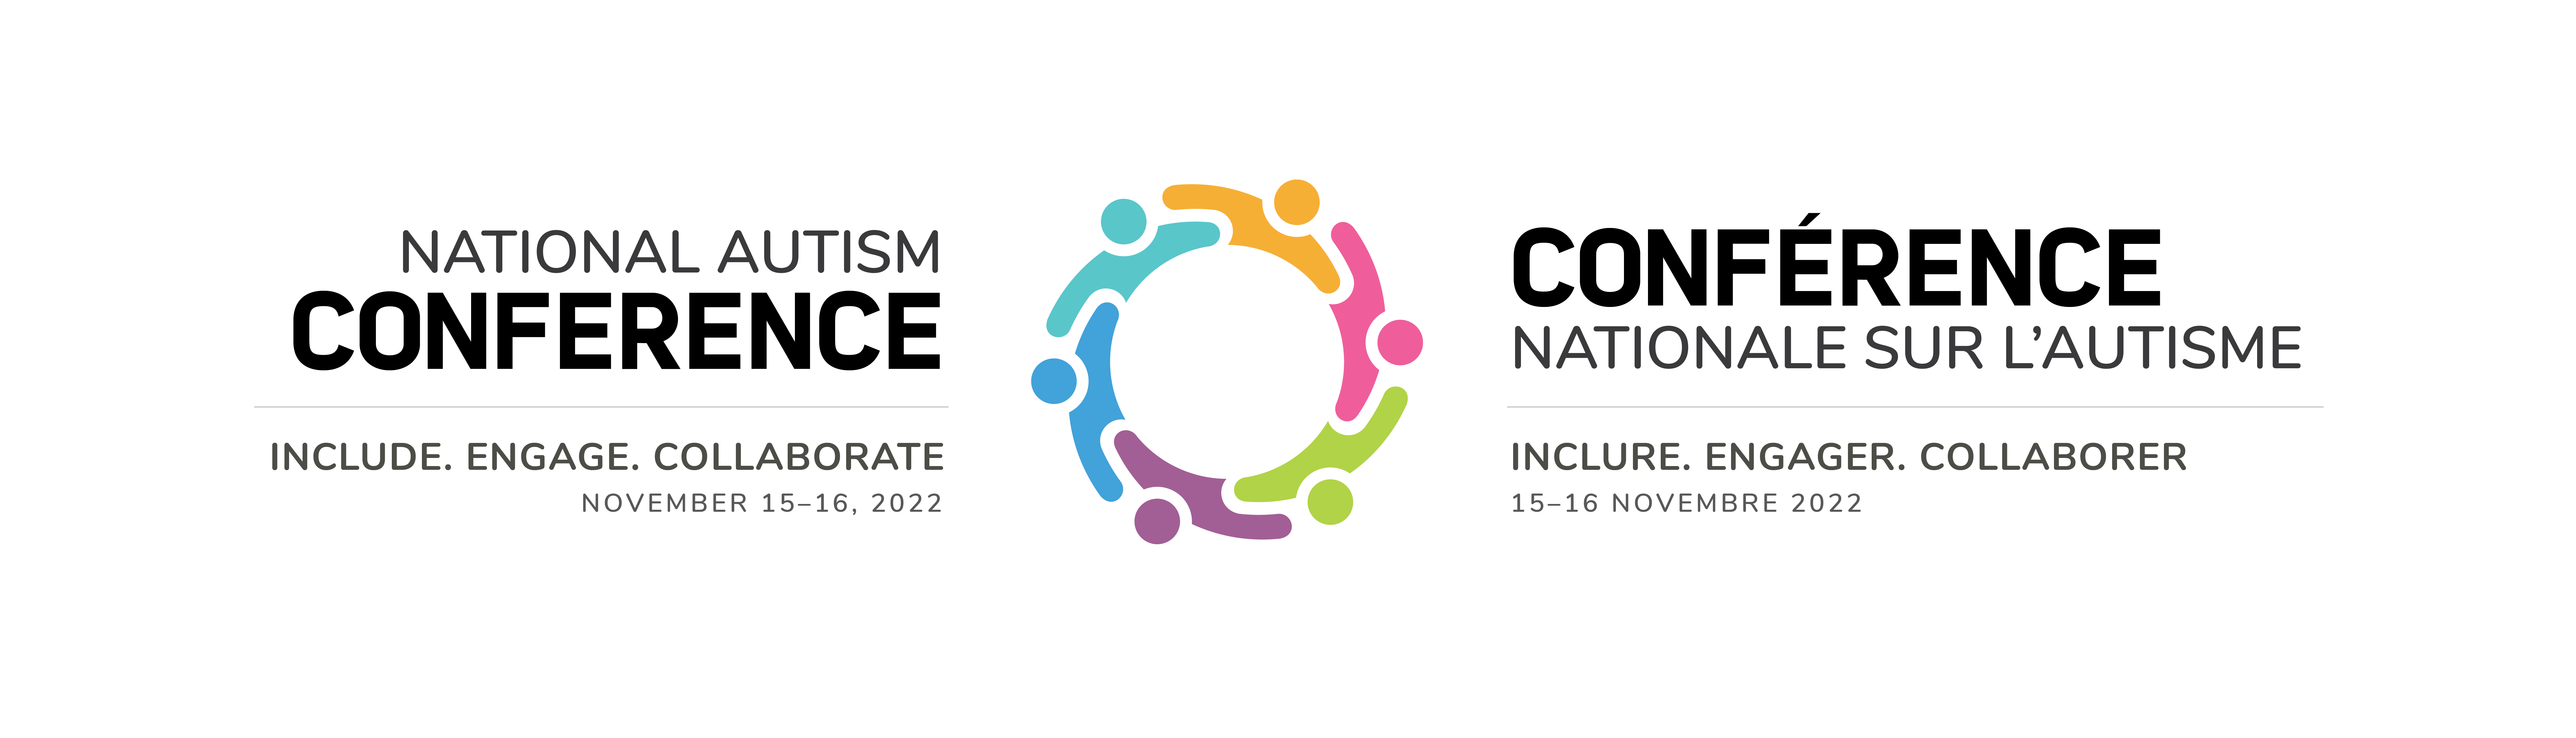 A bilingual logo, National Autism Conference: Include. Engage. Collaborate, November 15-16, 2022. An image of colorful, gender-neutral human figures holding one another in the shape of a circle that signifies diversity and inclusion. Conférence nationale sur l’autisme: Inclure. Engager. Collaborer, 15-16 novembre 2022.